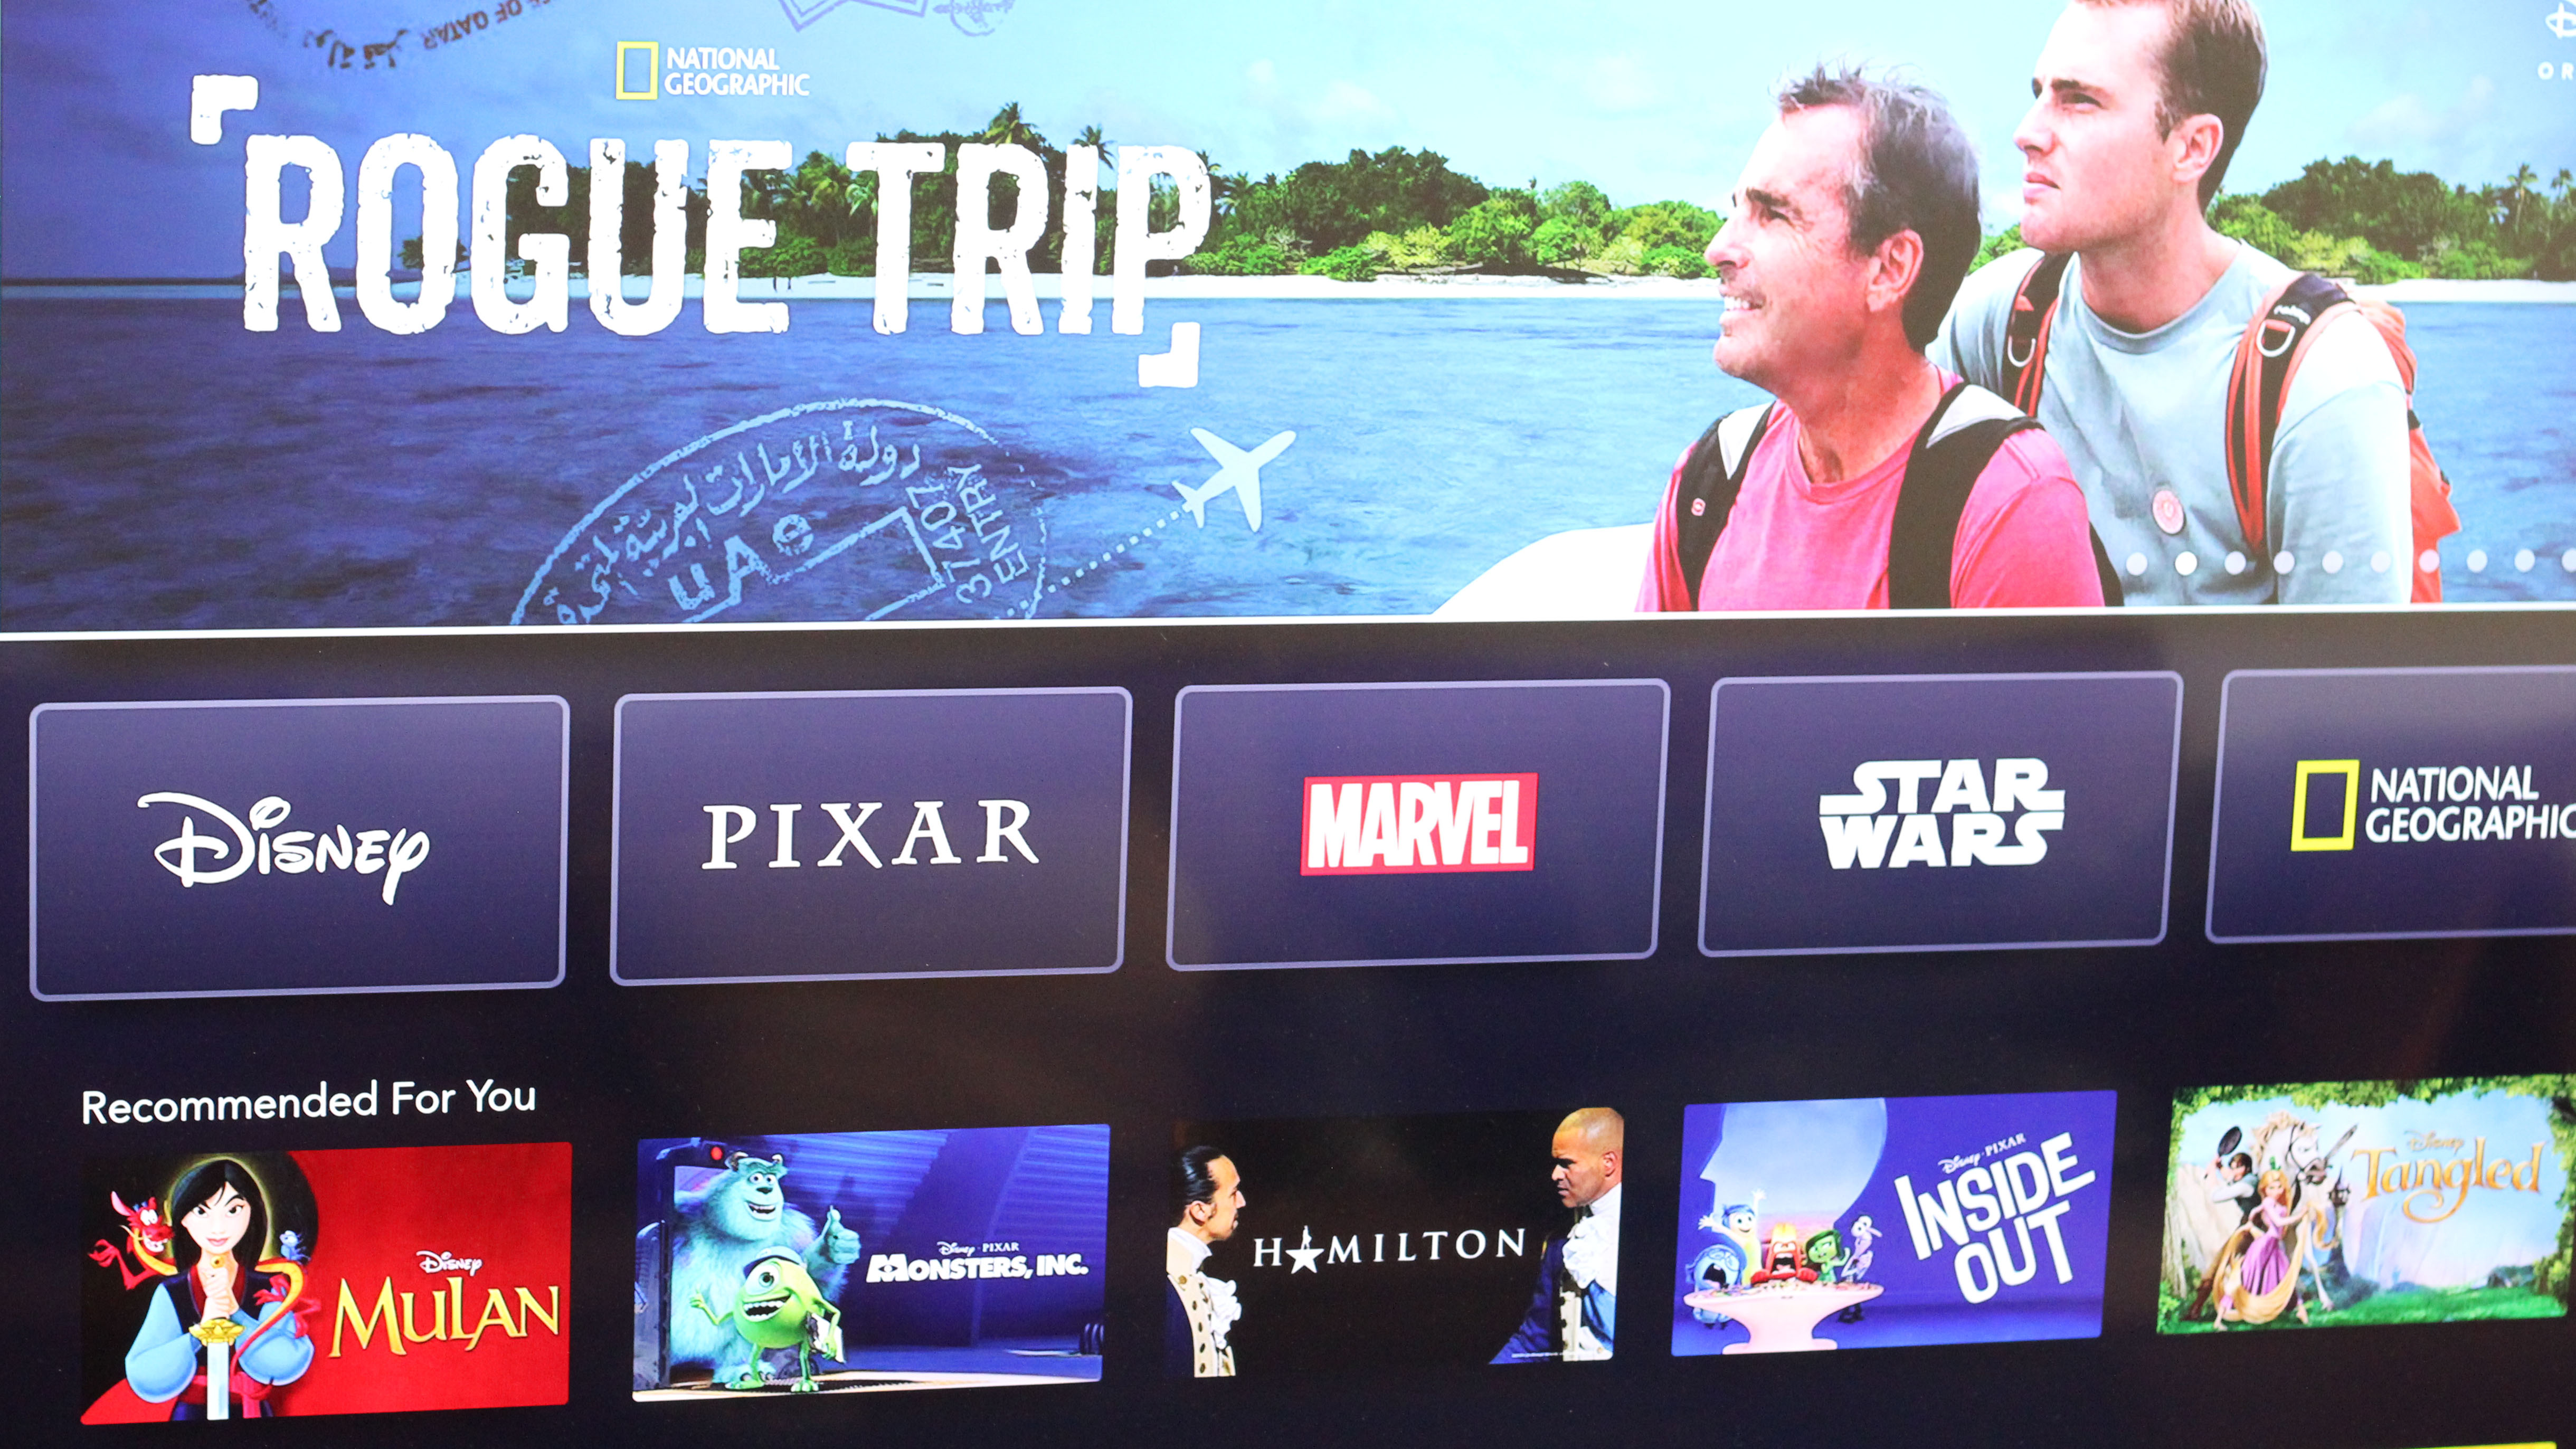 Image of a Samsung Sero TV showing the Disney Plus homepage